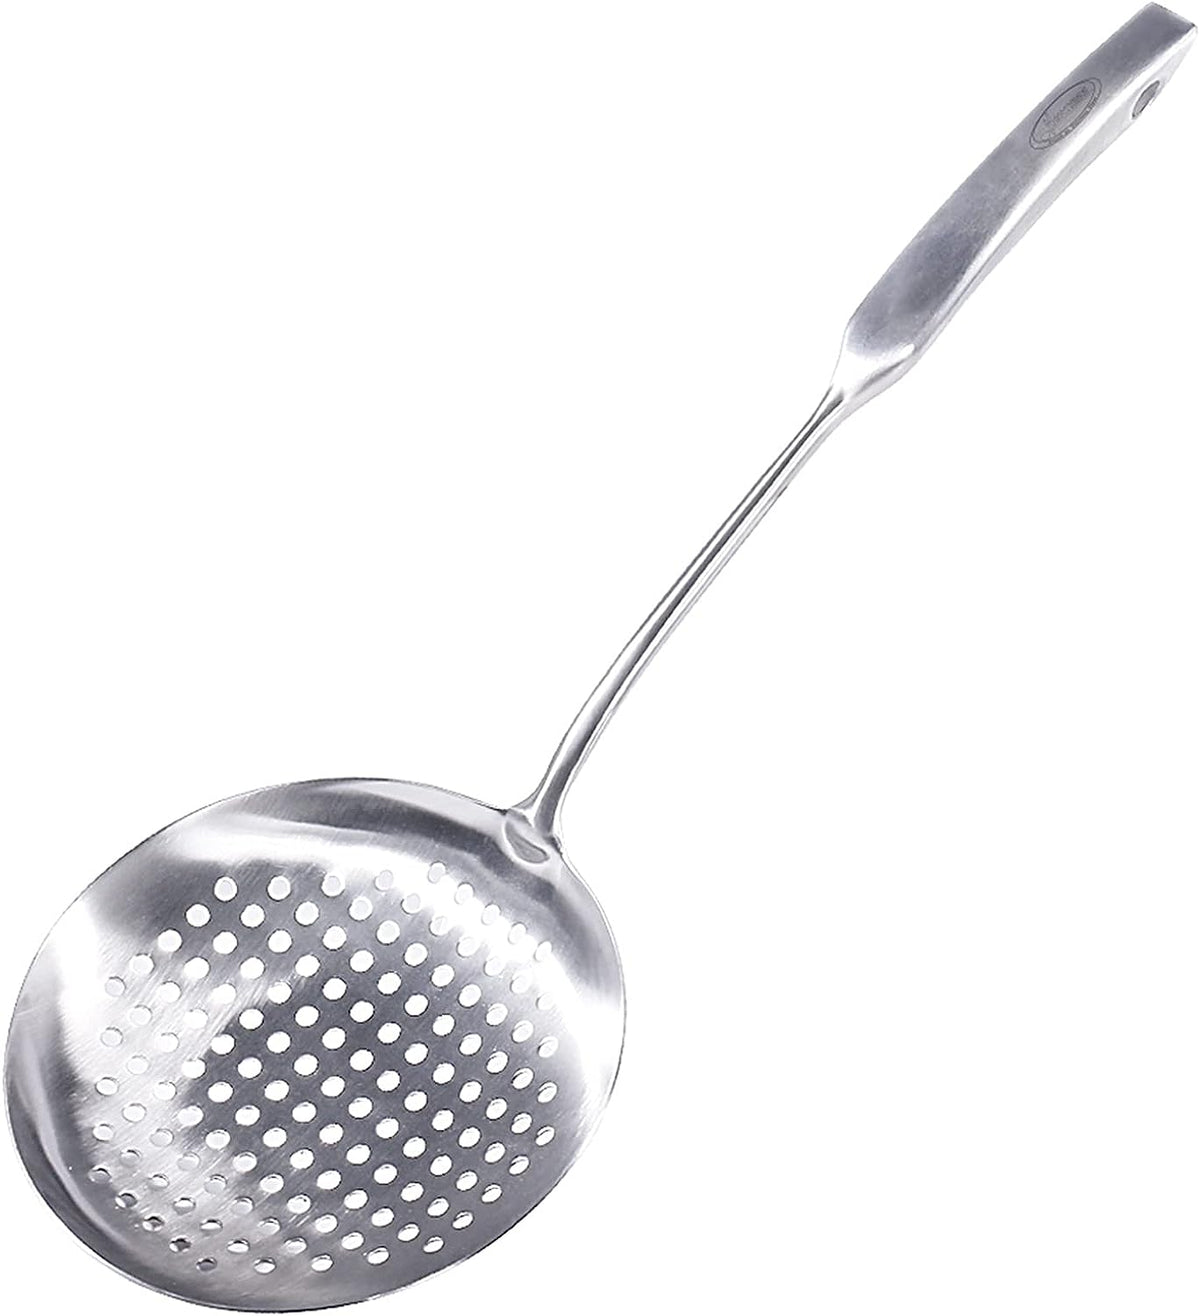 Newness Skimmer Slotted Spoon